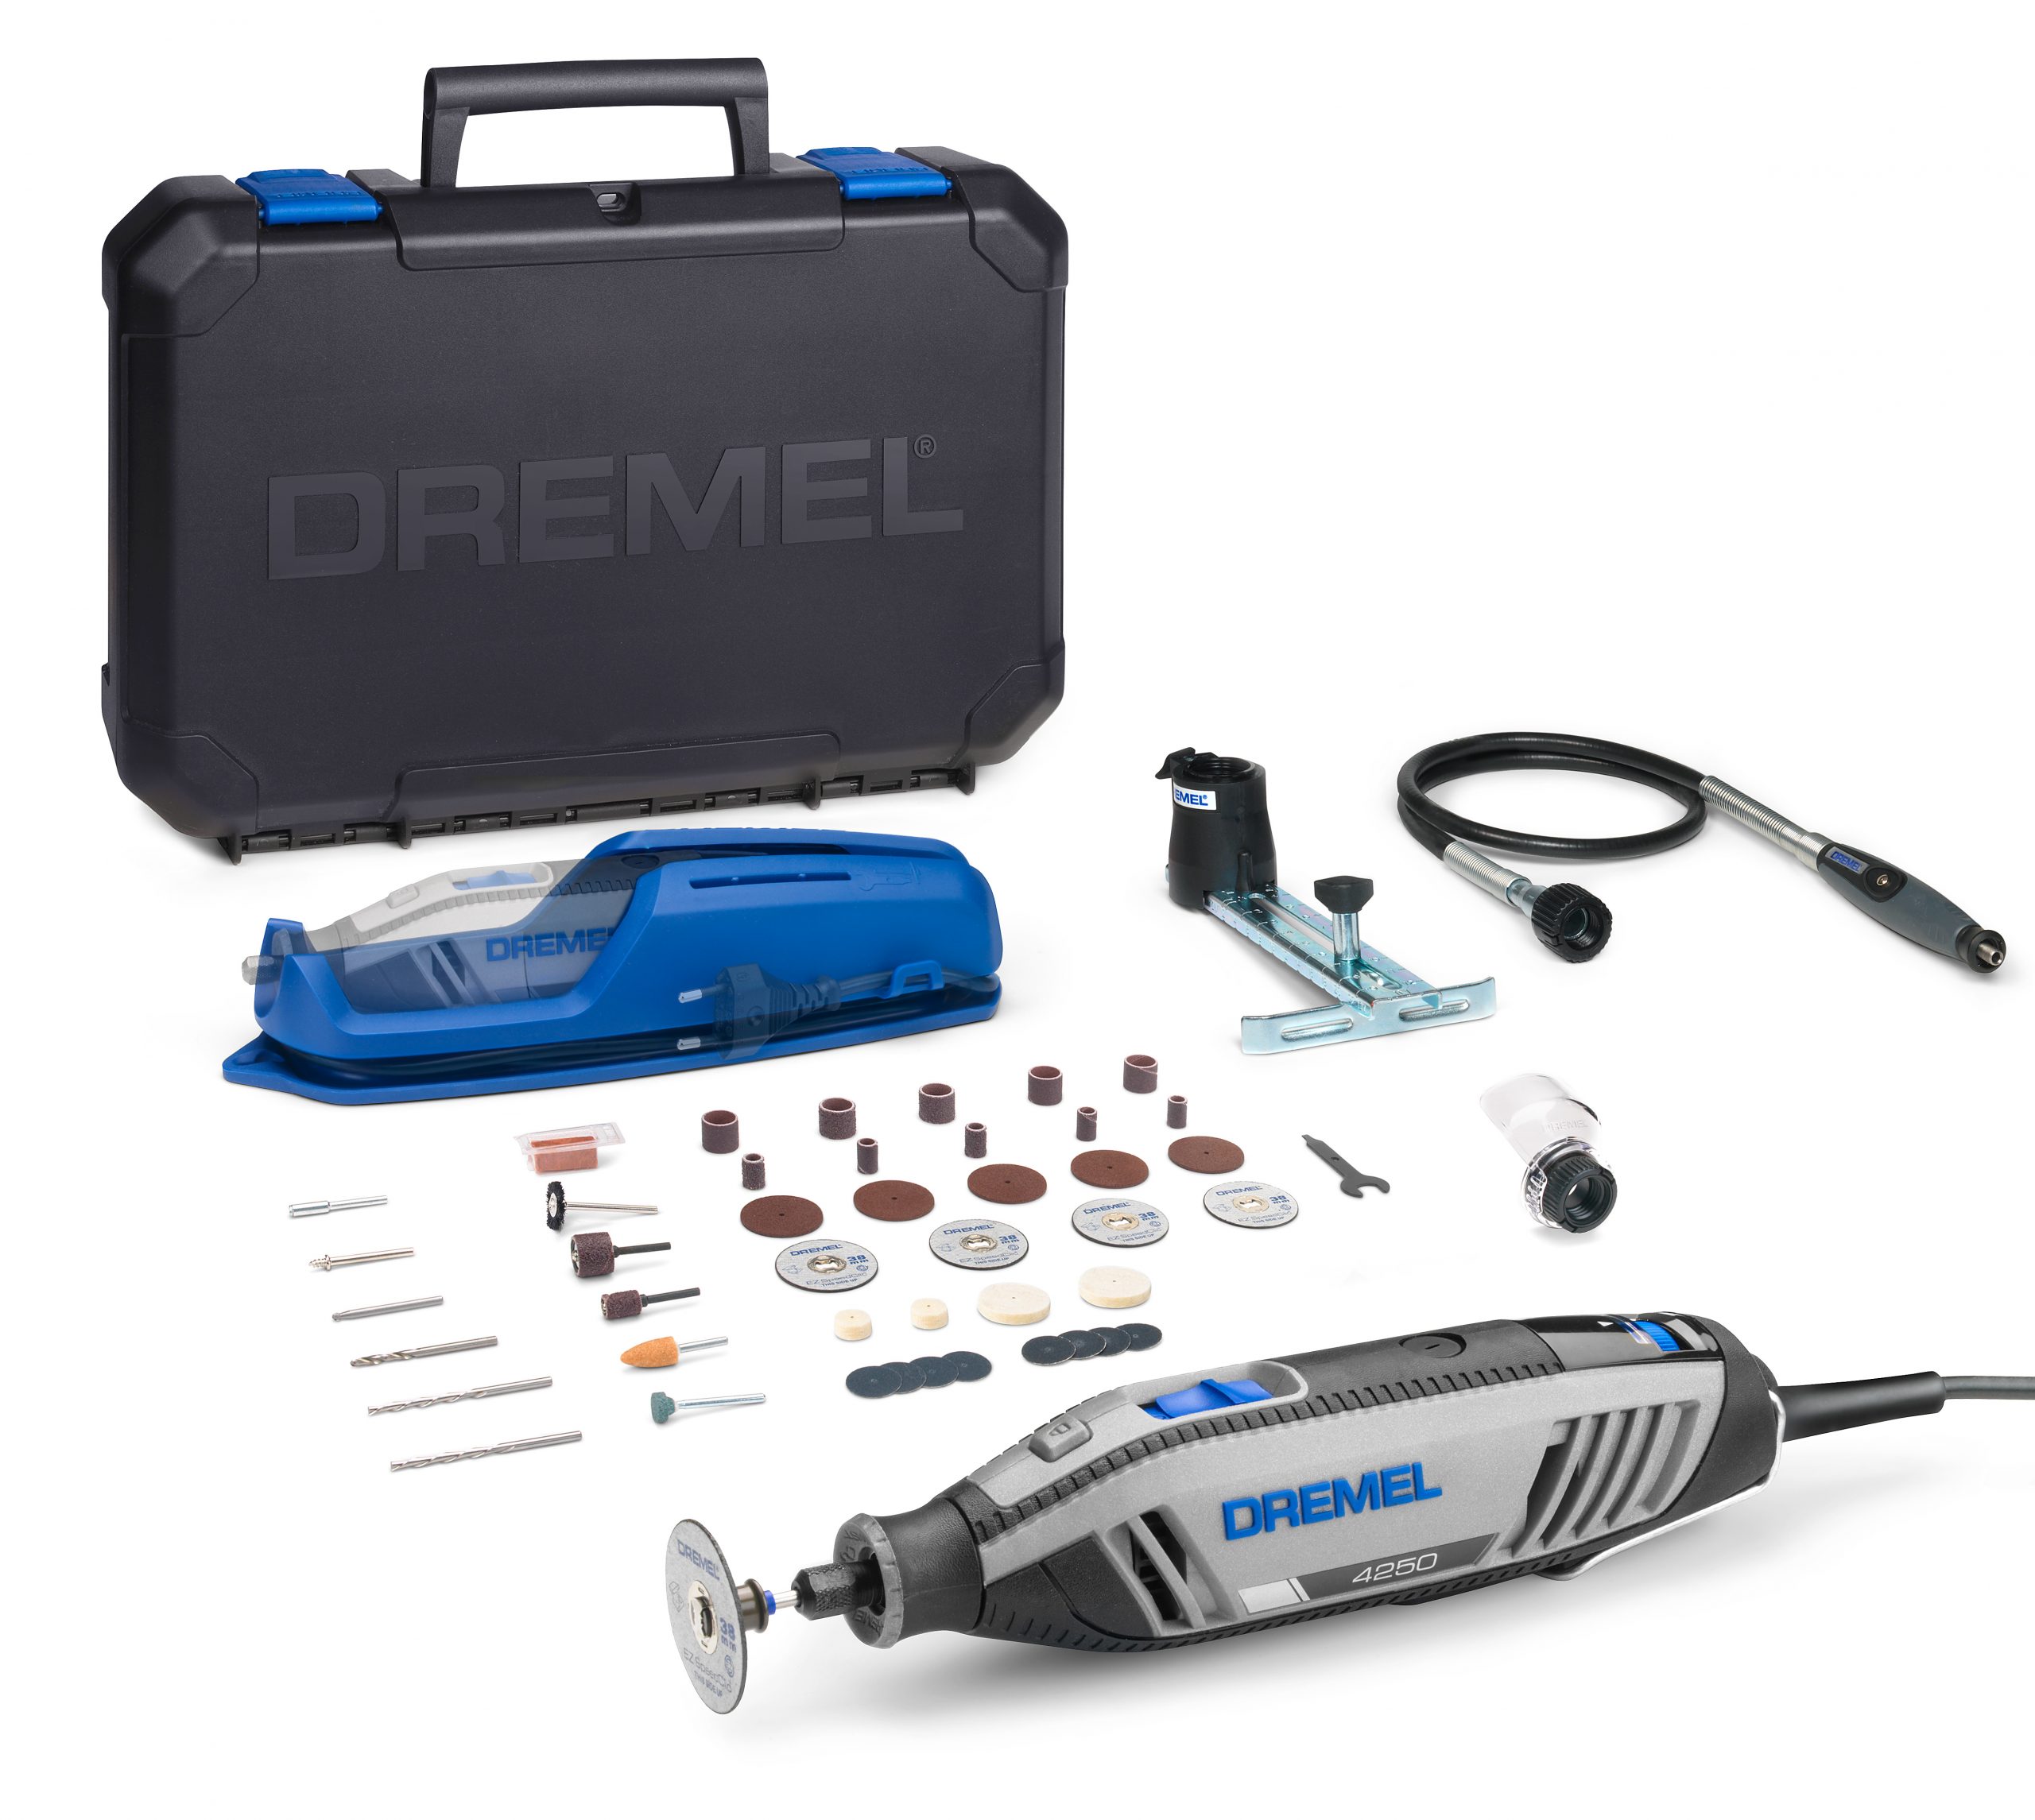 Dremel 4250-6/128 outil multi-usage (175W), 6 adaptations, 128 access